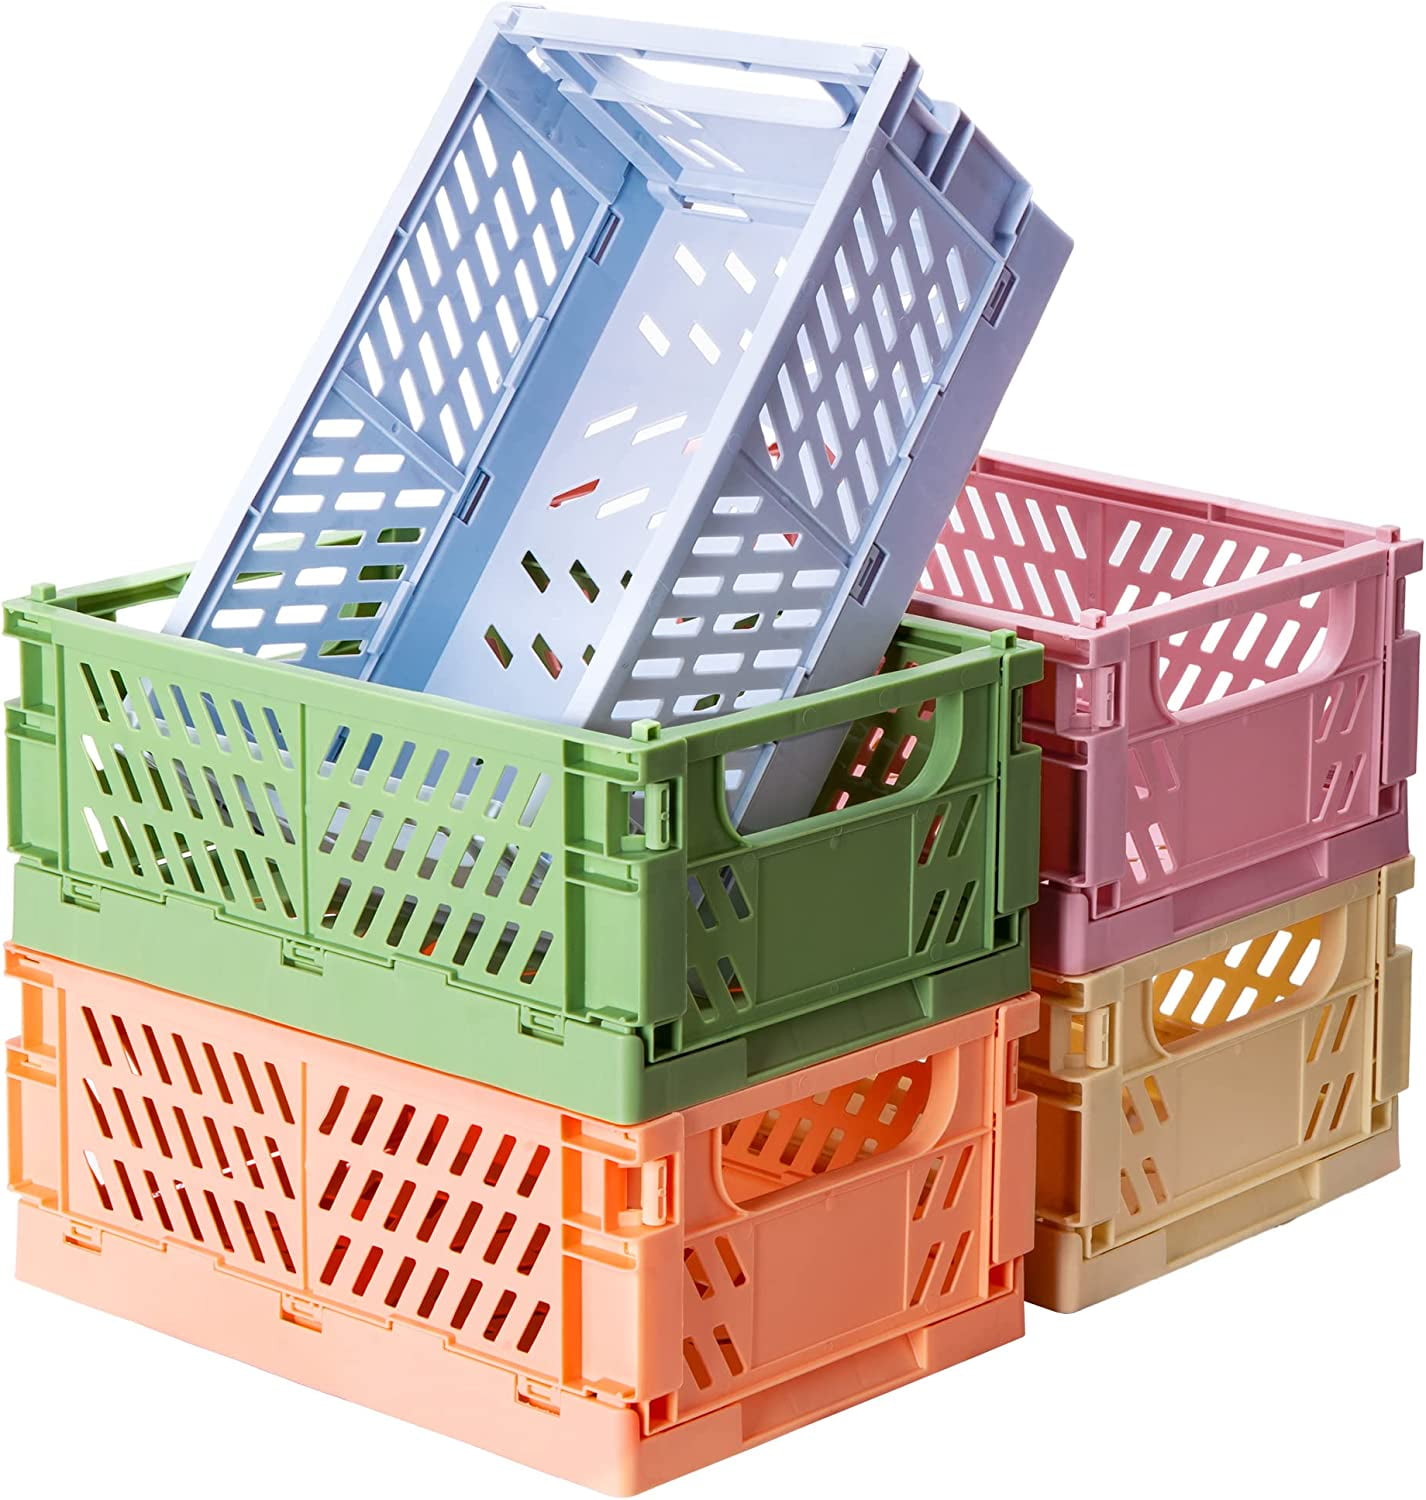 6x Wham Plastic Home Office Handy Tidy Storage Large Basket Tray